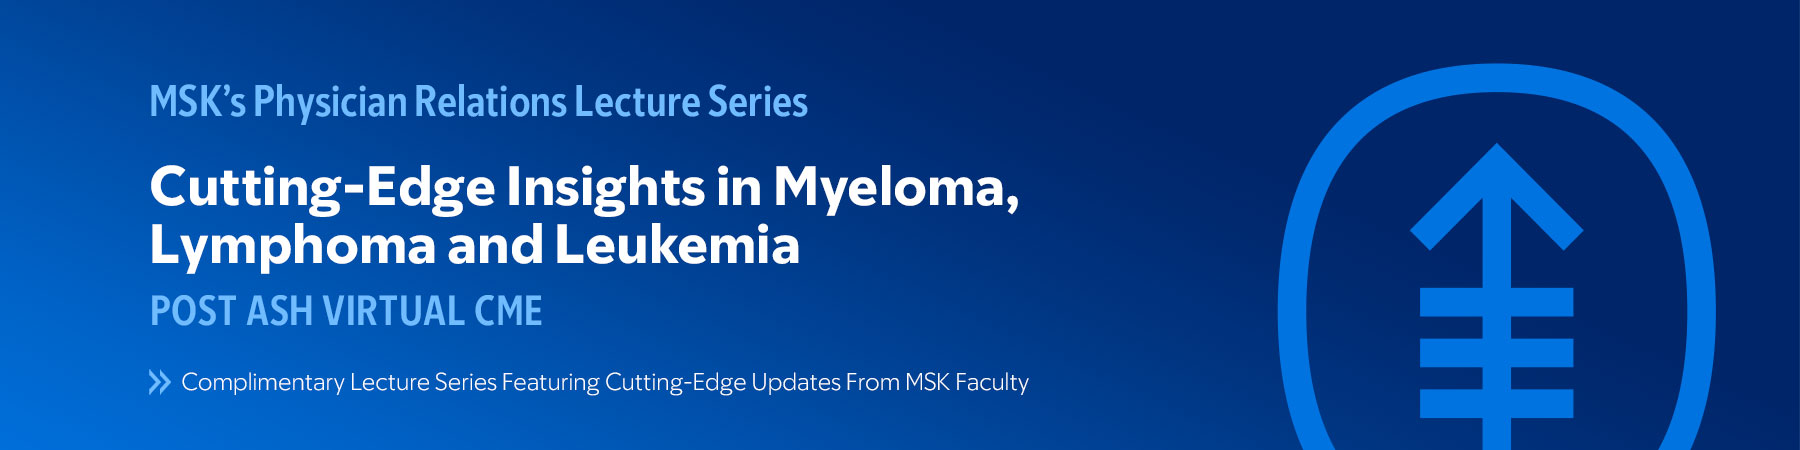 Cutting-Edge Insights in Myeloma, Lymphoma, and Leukemia: Post ASH Virtual CME Banner